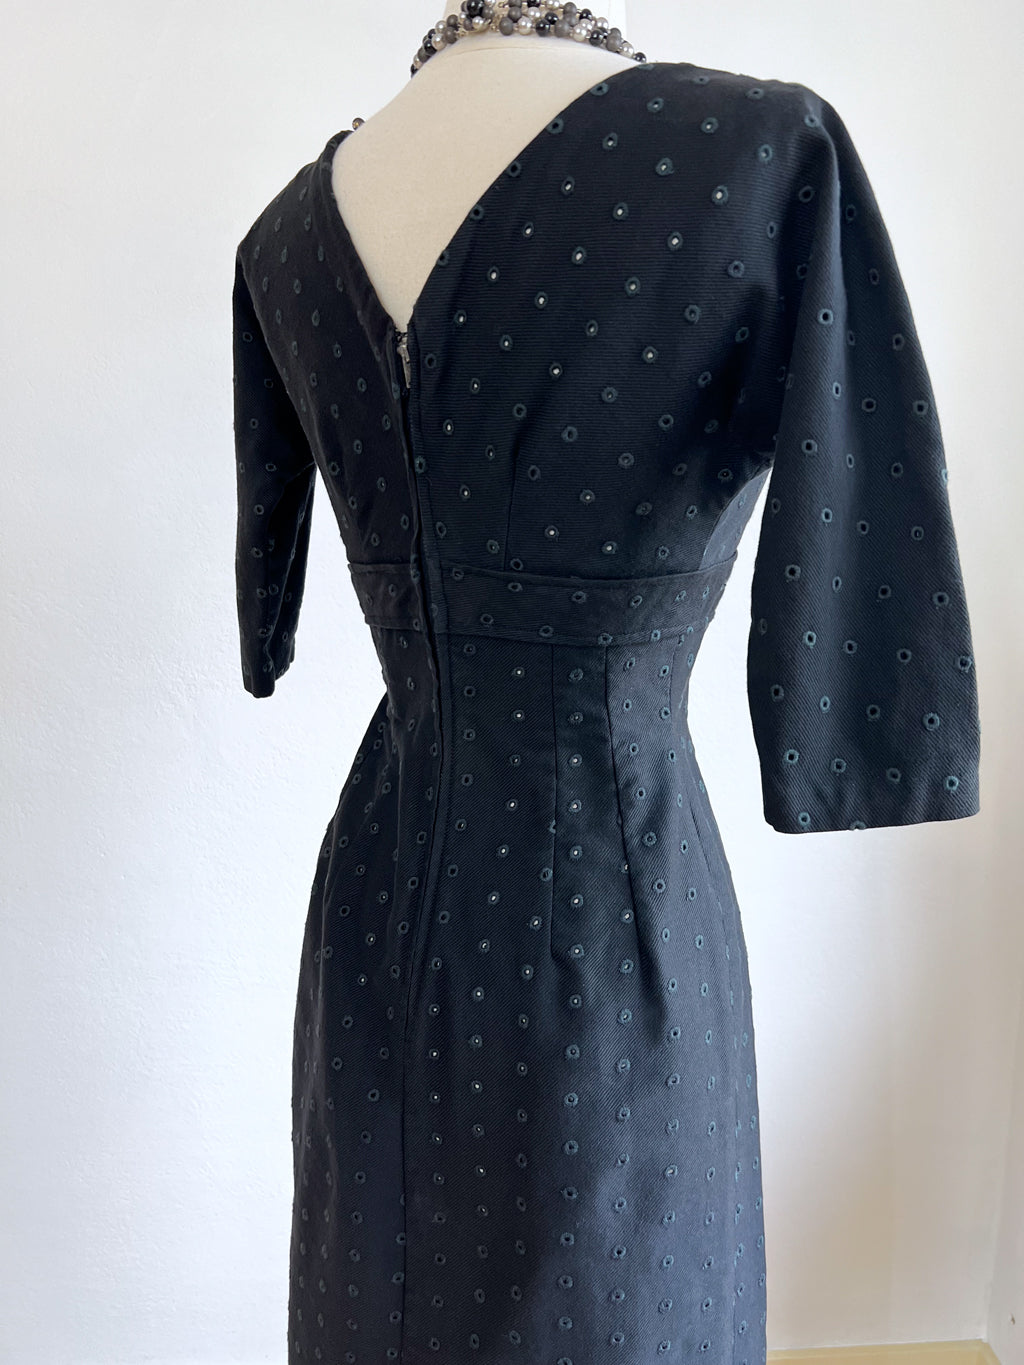 Vintage 1950s Jerry Gilden Cocktail Dress - Sultry Sculpted Black Eyelet Peekaboo Embroidered Wiggle Dress Size XS - S